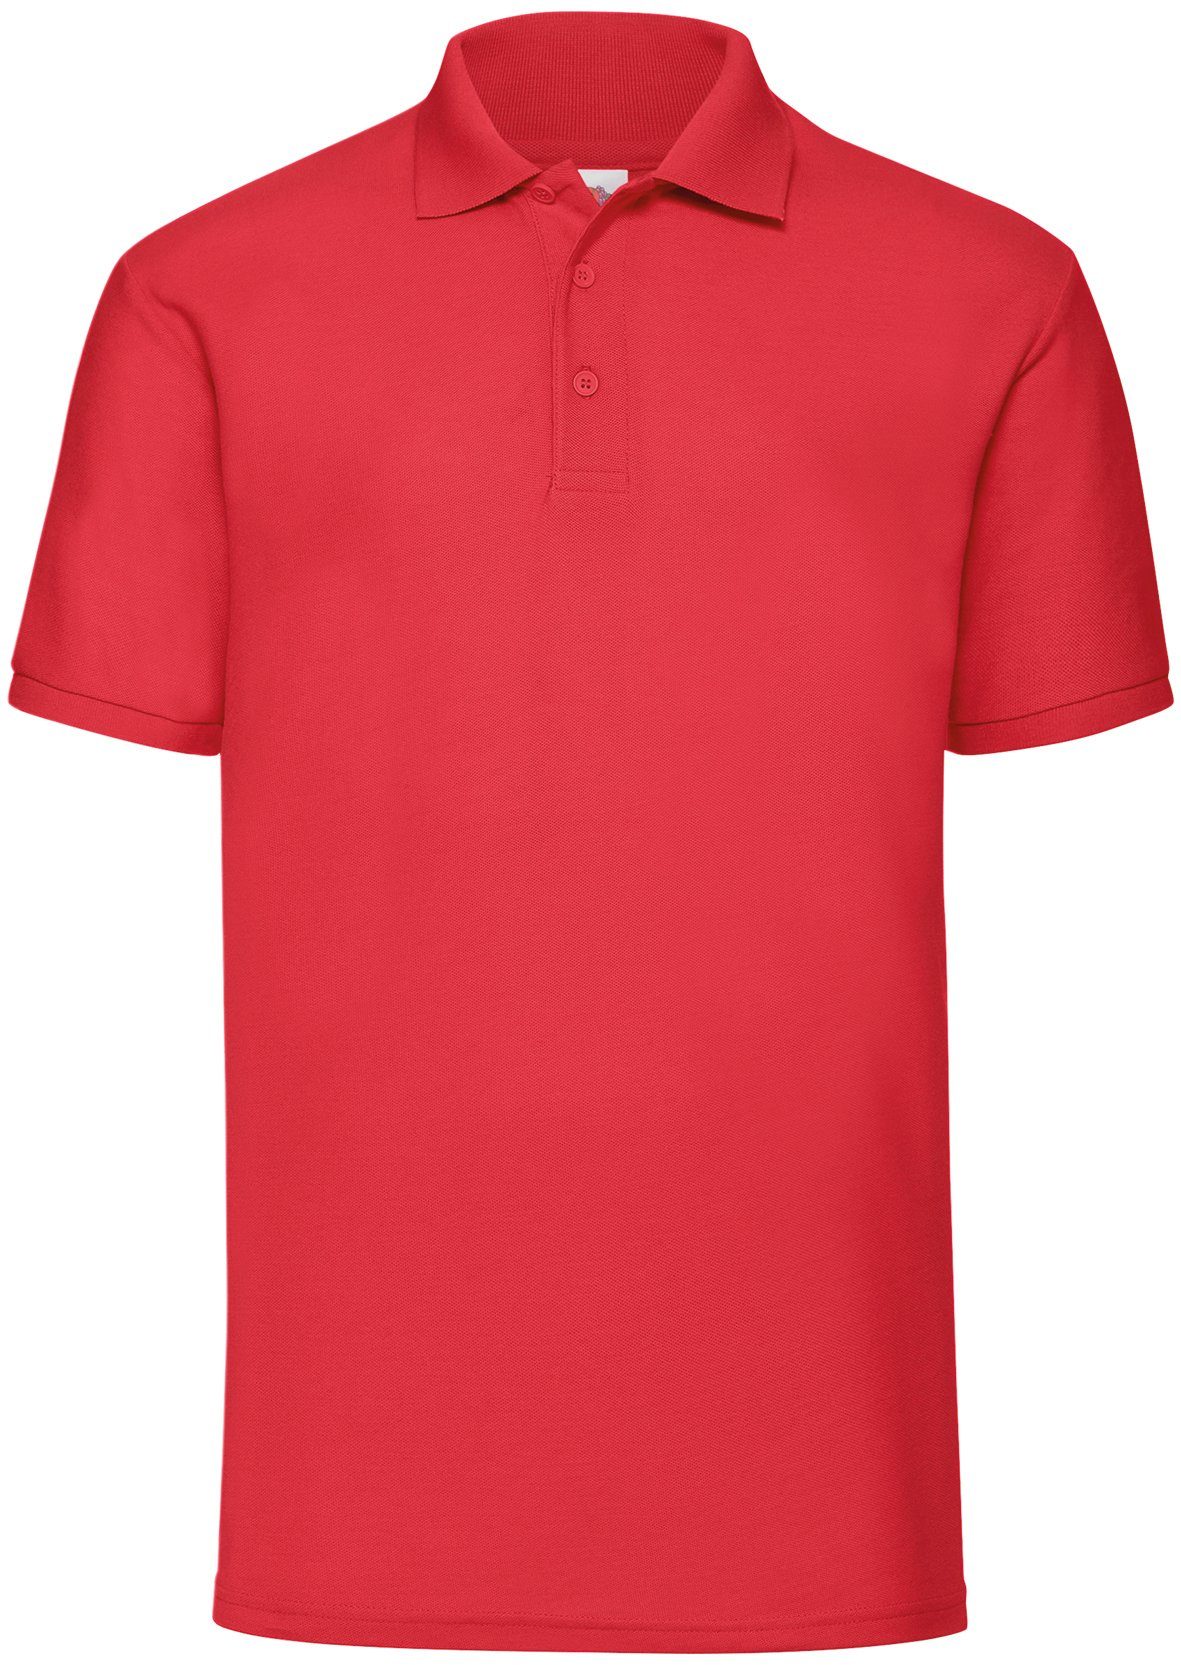 Fruit of the Loom Poloshirt Fruit of the Loom 65/35 Polo rot